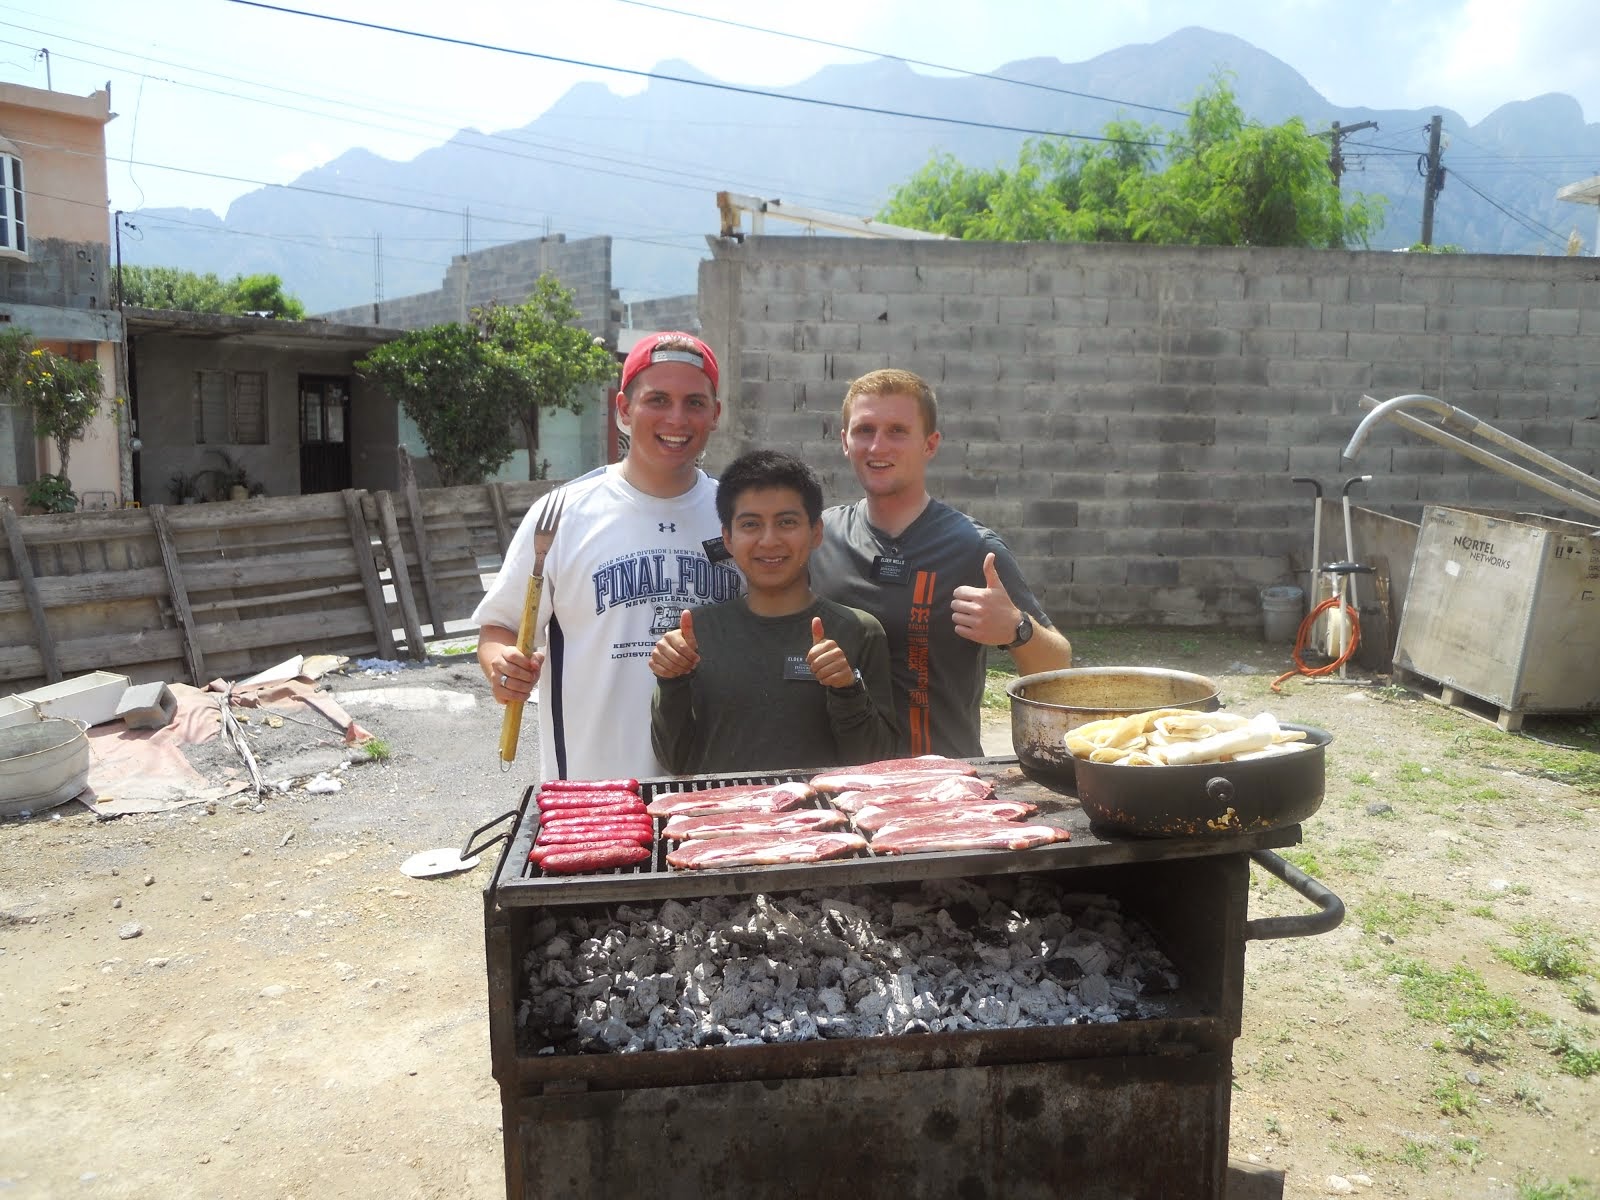 BBQ's even in Mexico